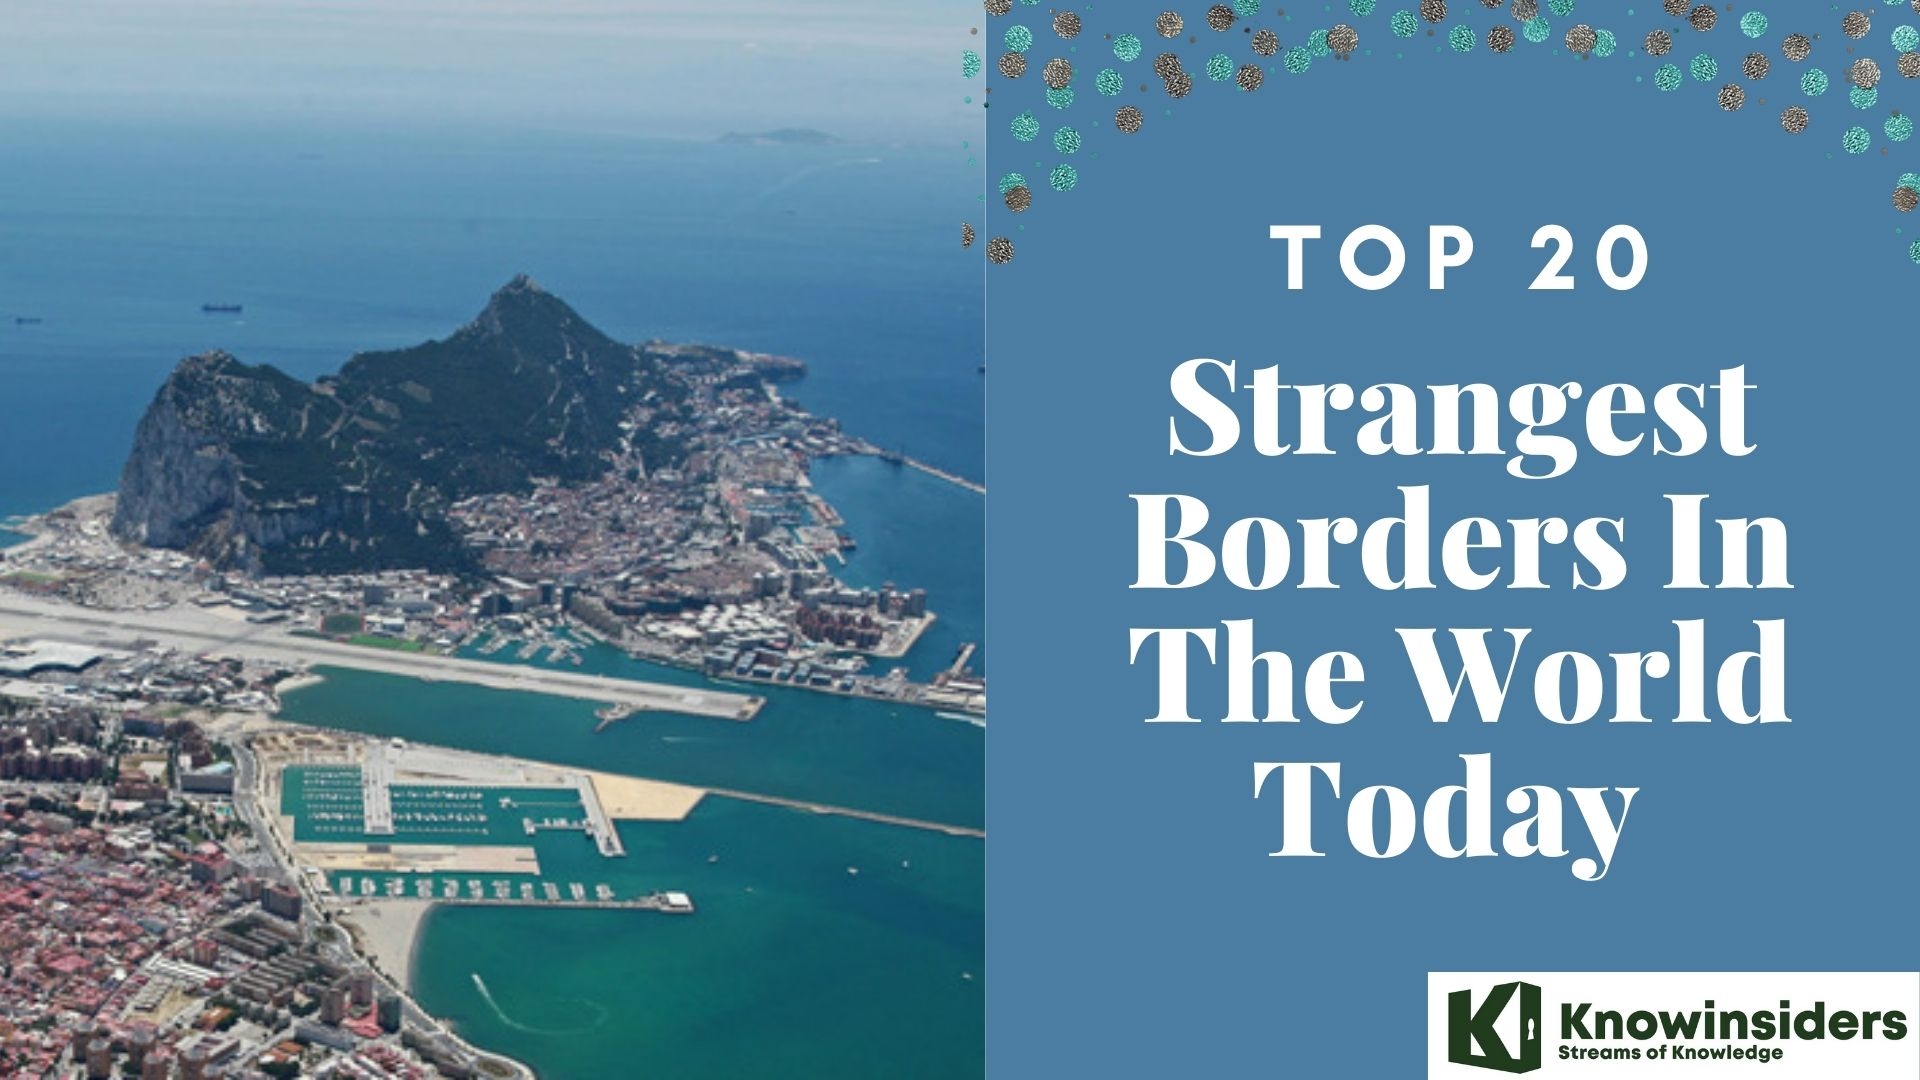 Top 10 Strangest Borders In The World Today